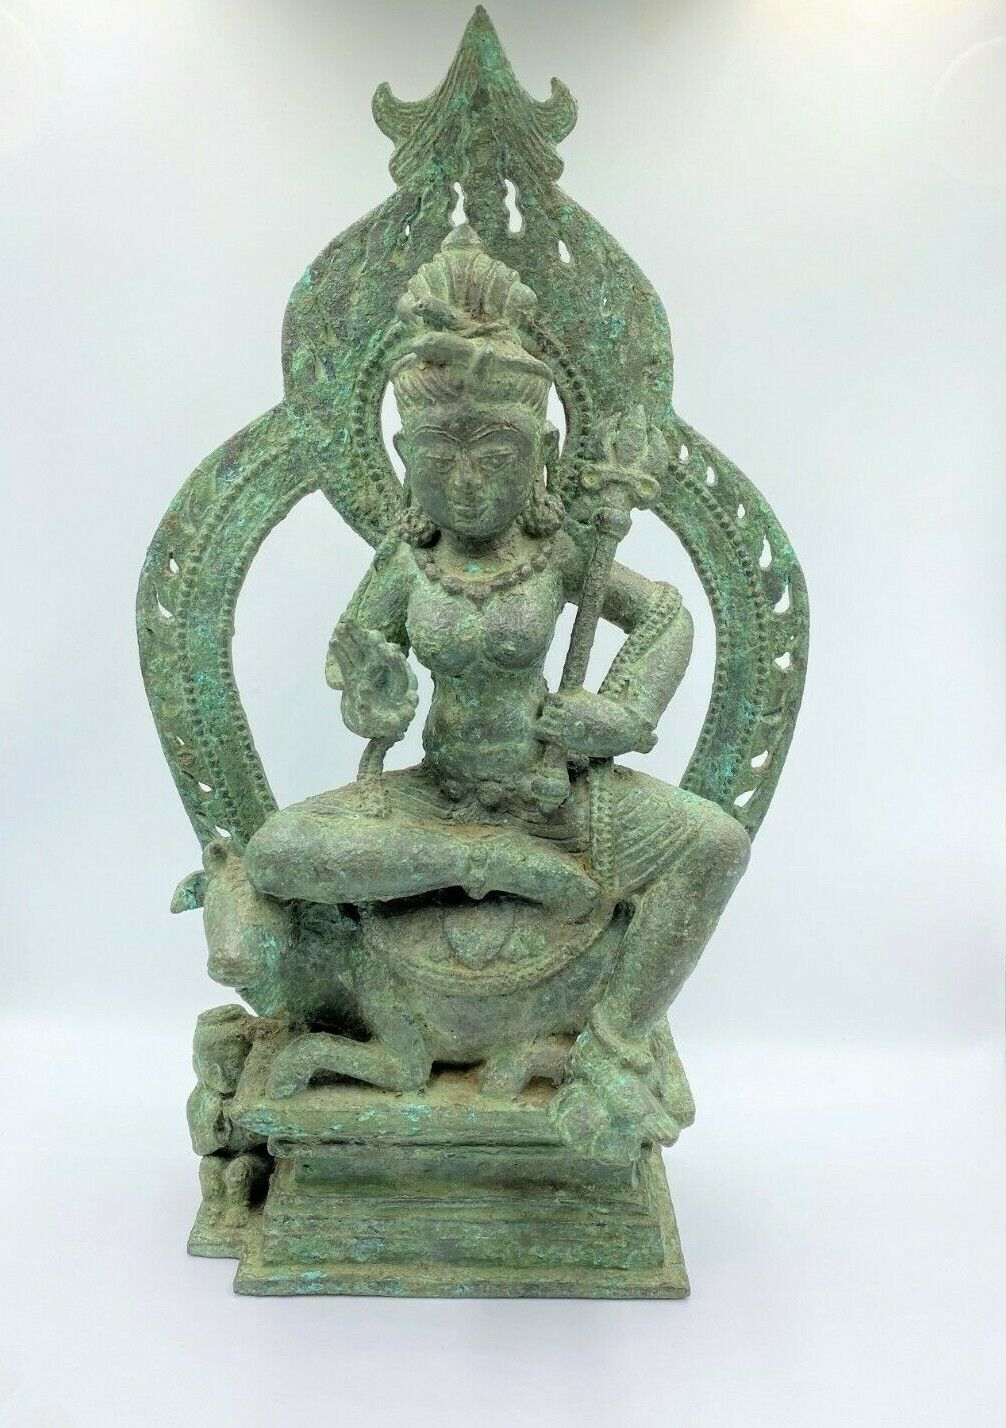 Old Ancient Bronze Seated Figure Of Deity Green Tare South East Asia 15 century 